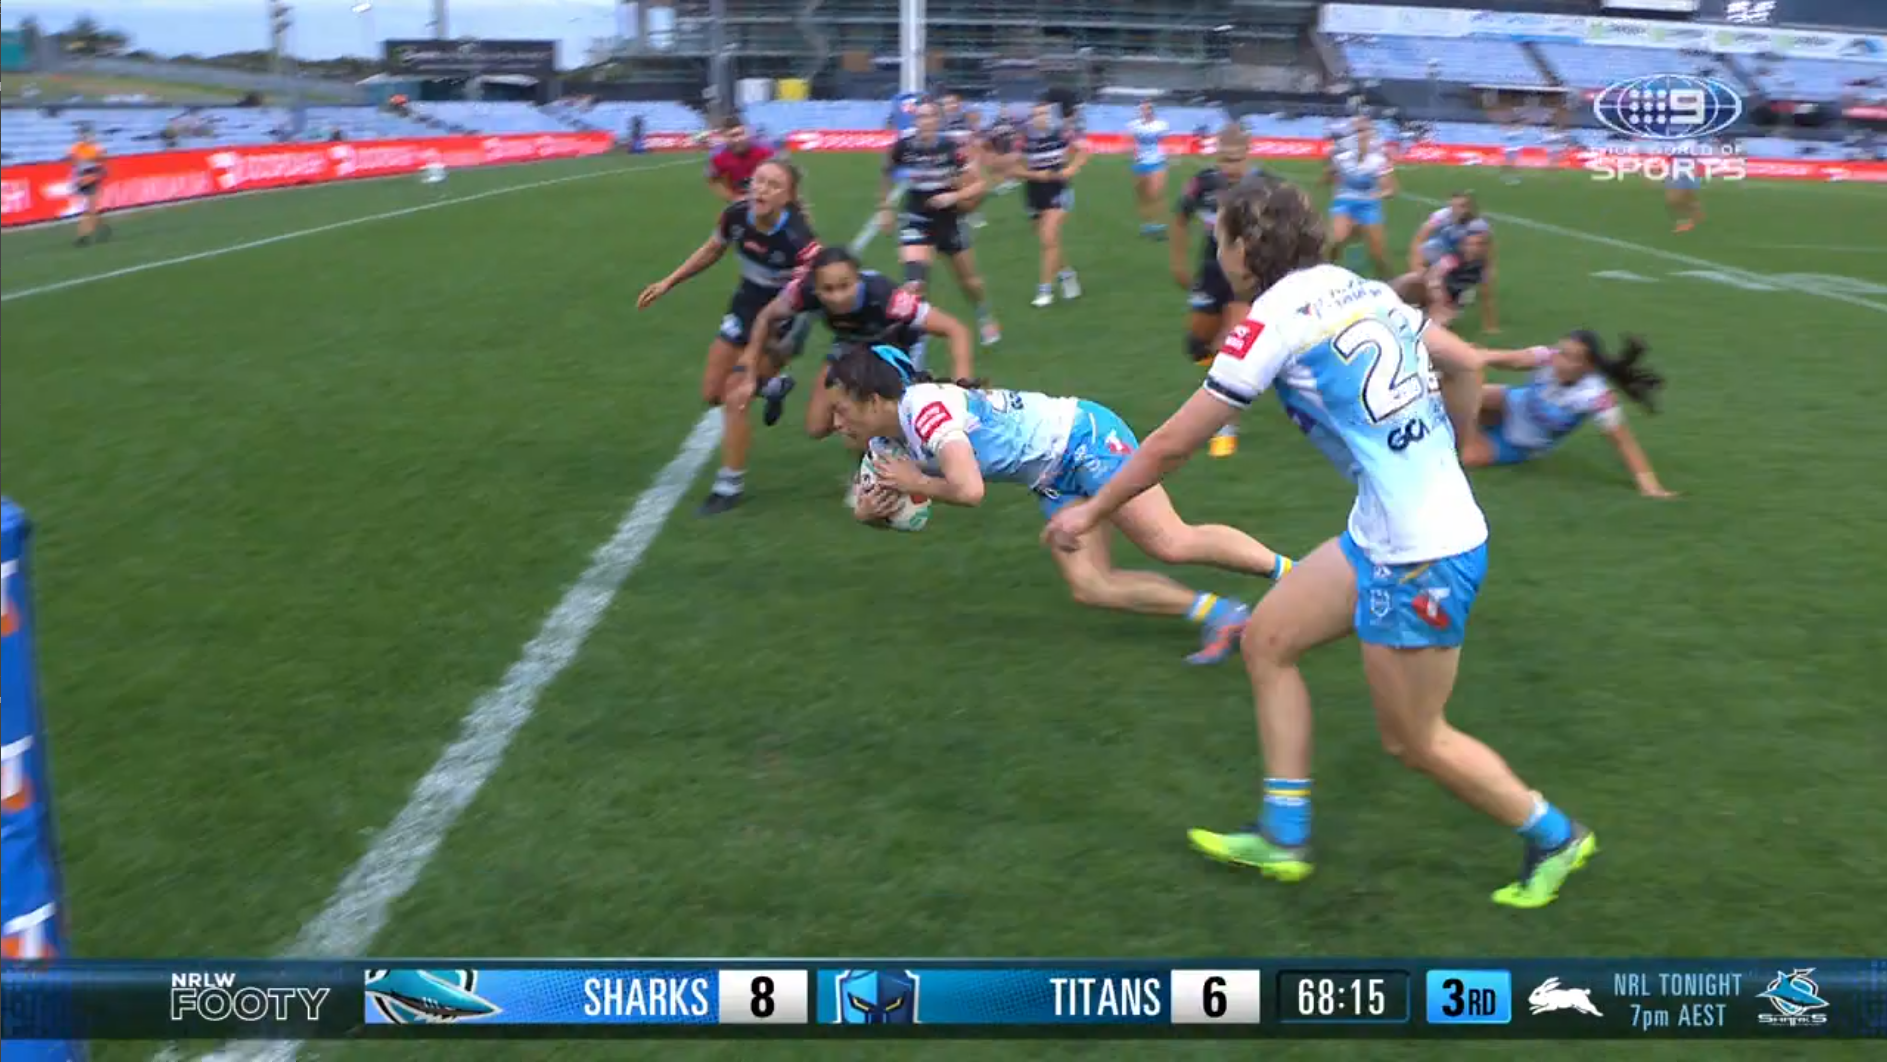 Gold Coast 'hero' scores last-gasp try as Titans stun Sharks at the death